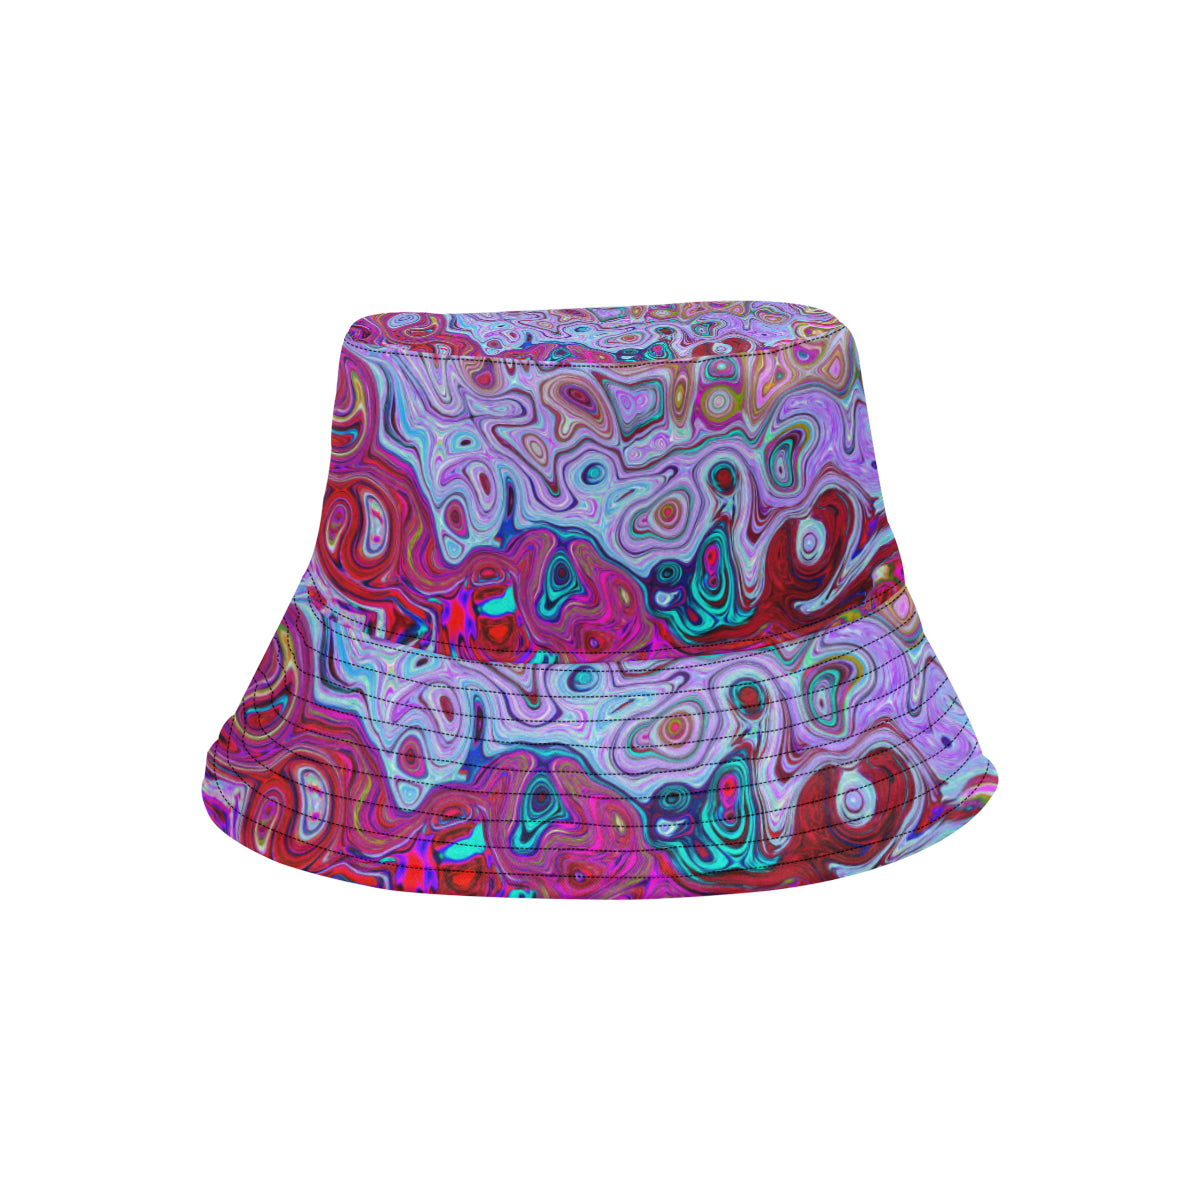 Bucket Hats, Retro Groovy Abstract Lavender and Magenta Swirl